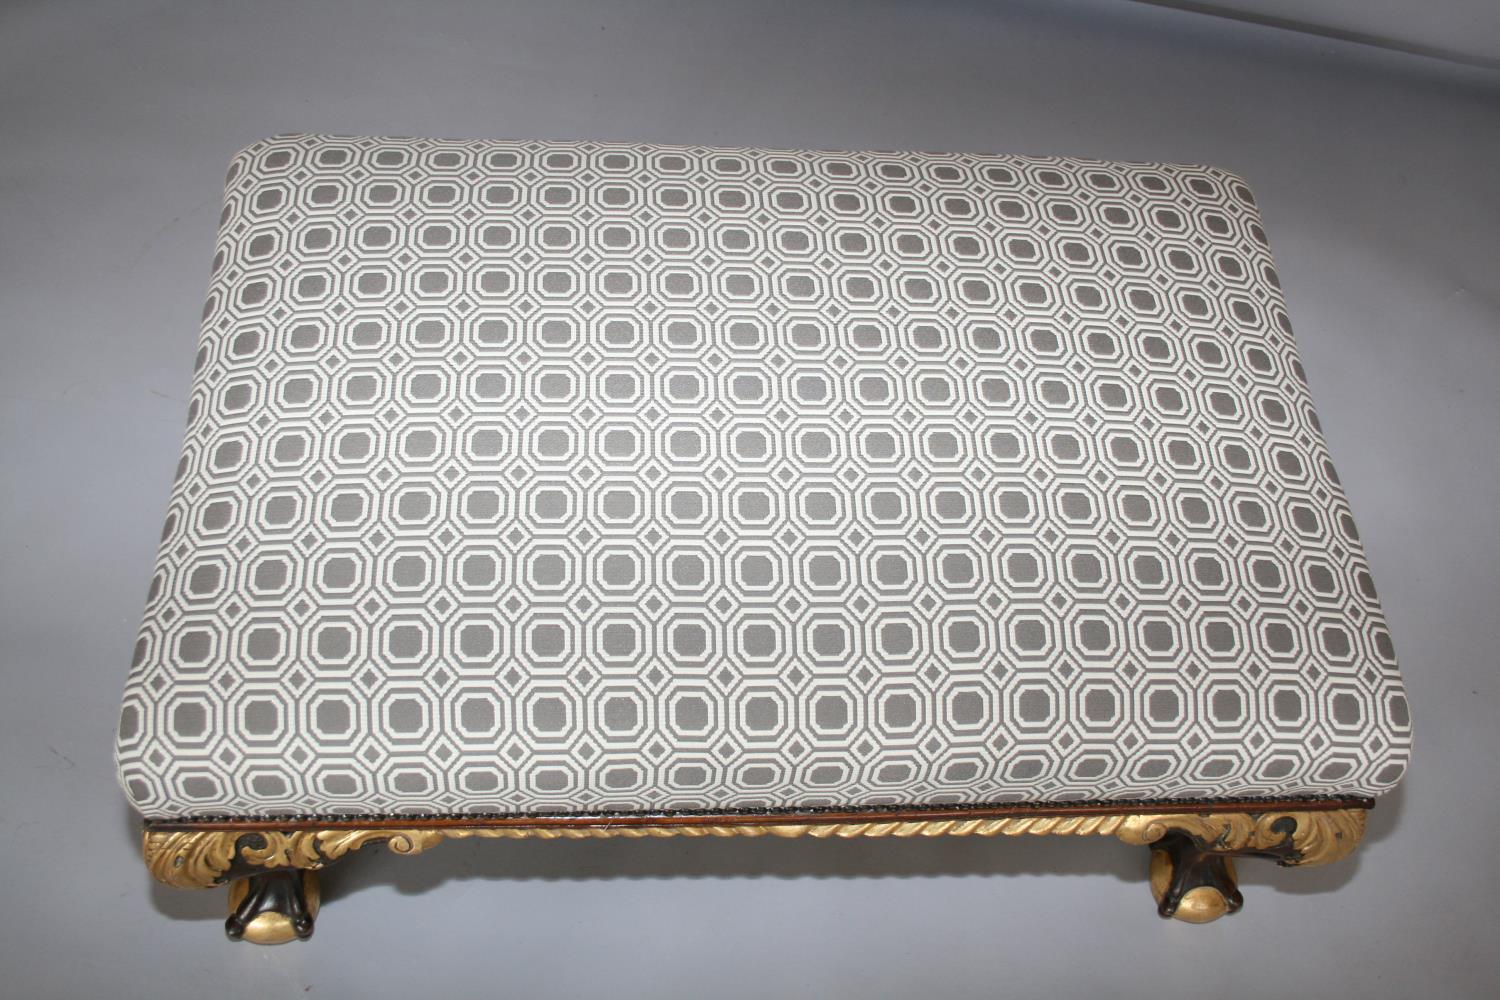 Decorative mahogany and gilt centre stool, upholstered with brass stud embellishment standing on - Image 3 of 3